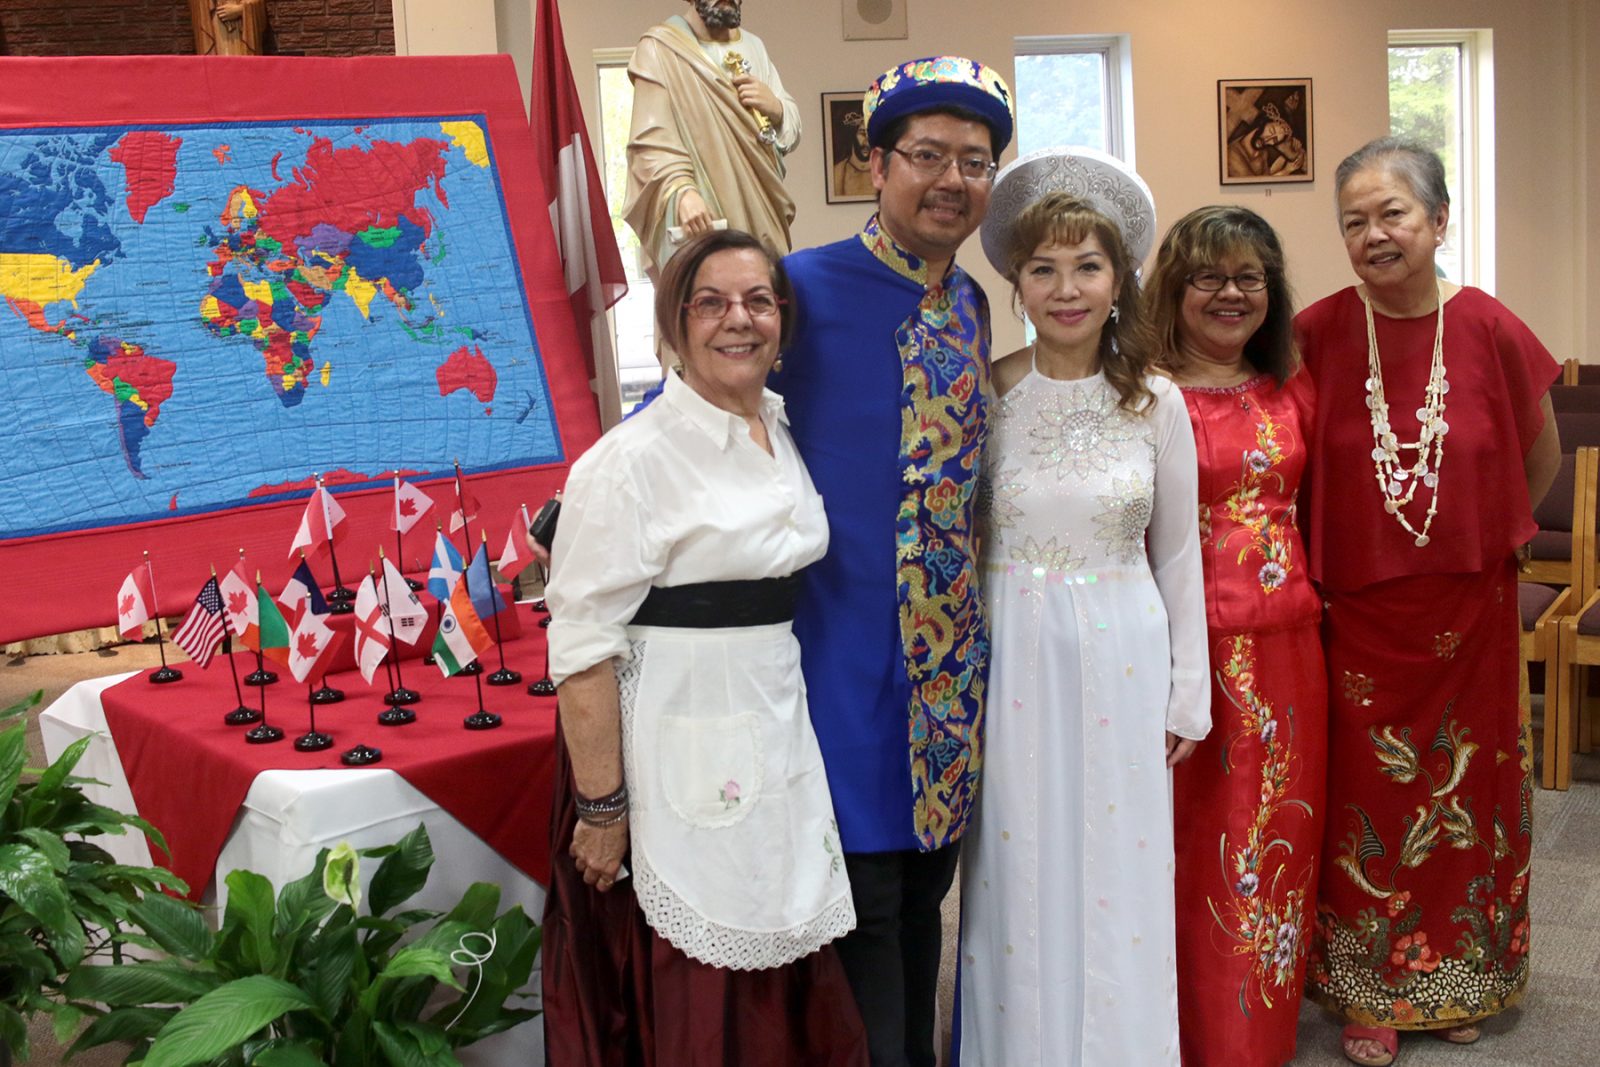 Faith and cultures come together at church culture event